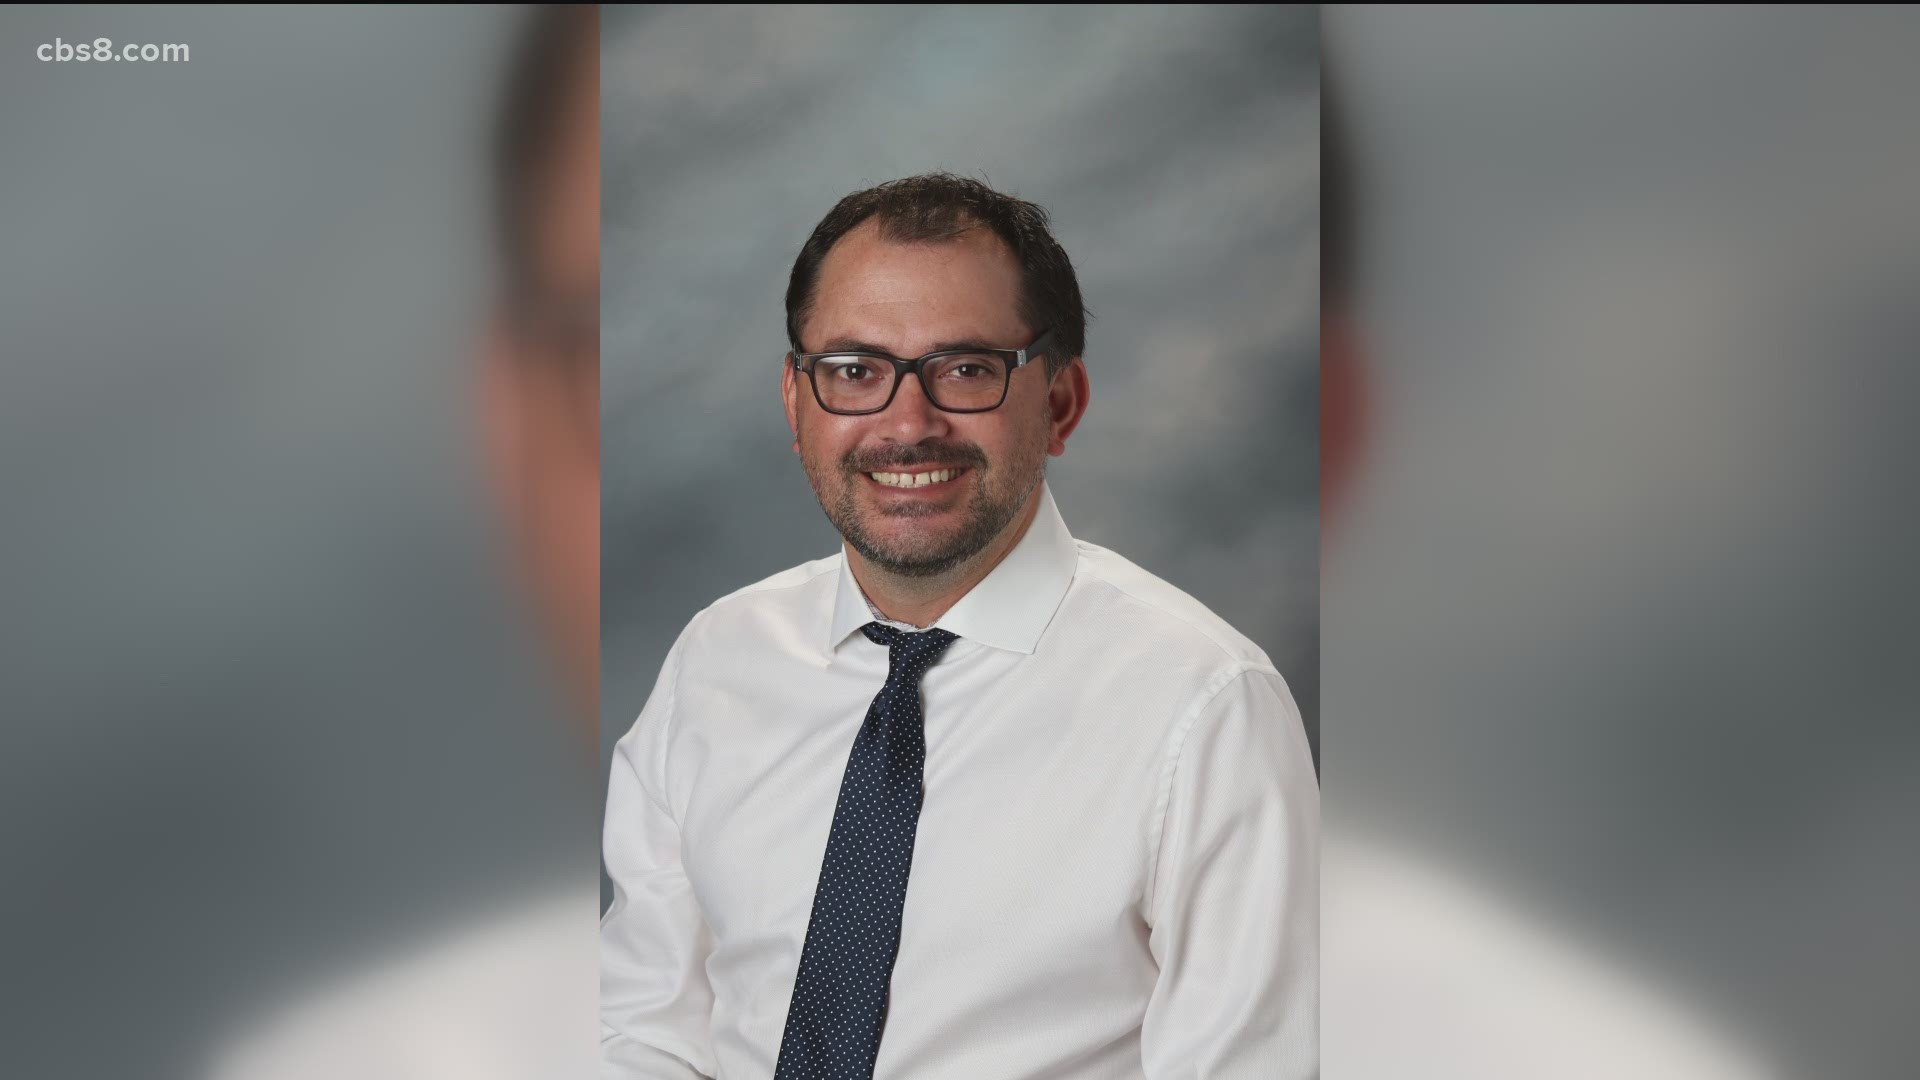 Cathedral Catholic High school is reporting that the SDPD has informed them that one of their teachers, Mario Fierro, was a victim of a homicide.